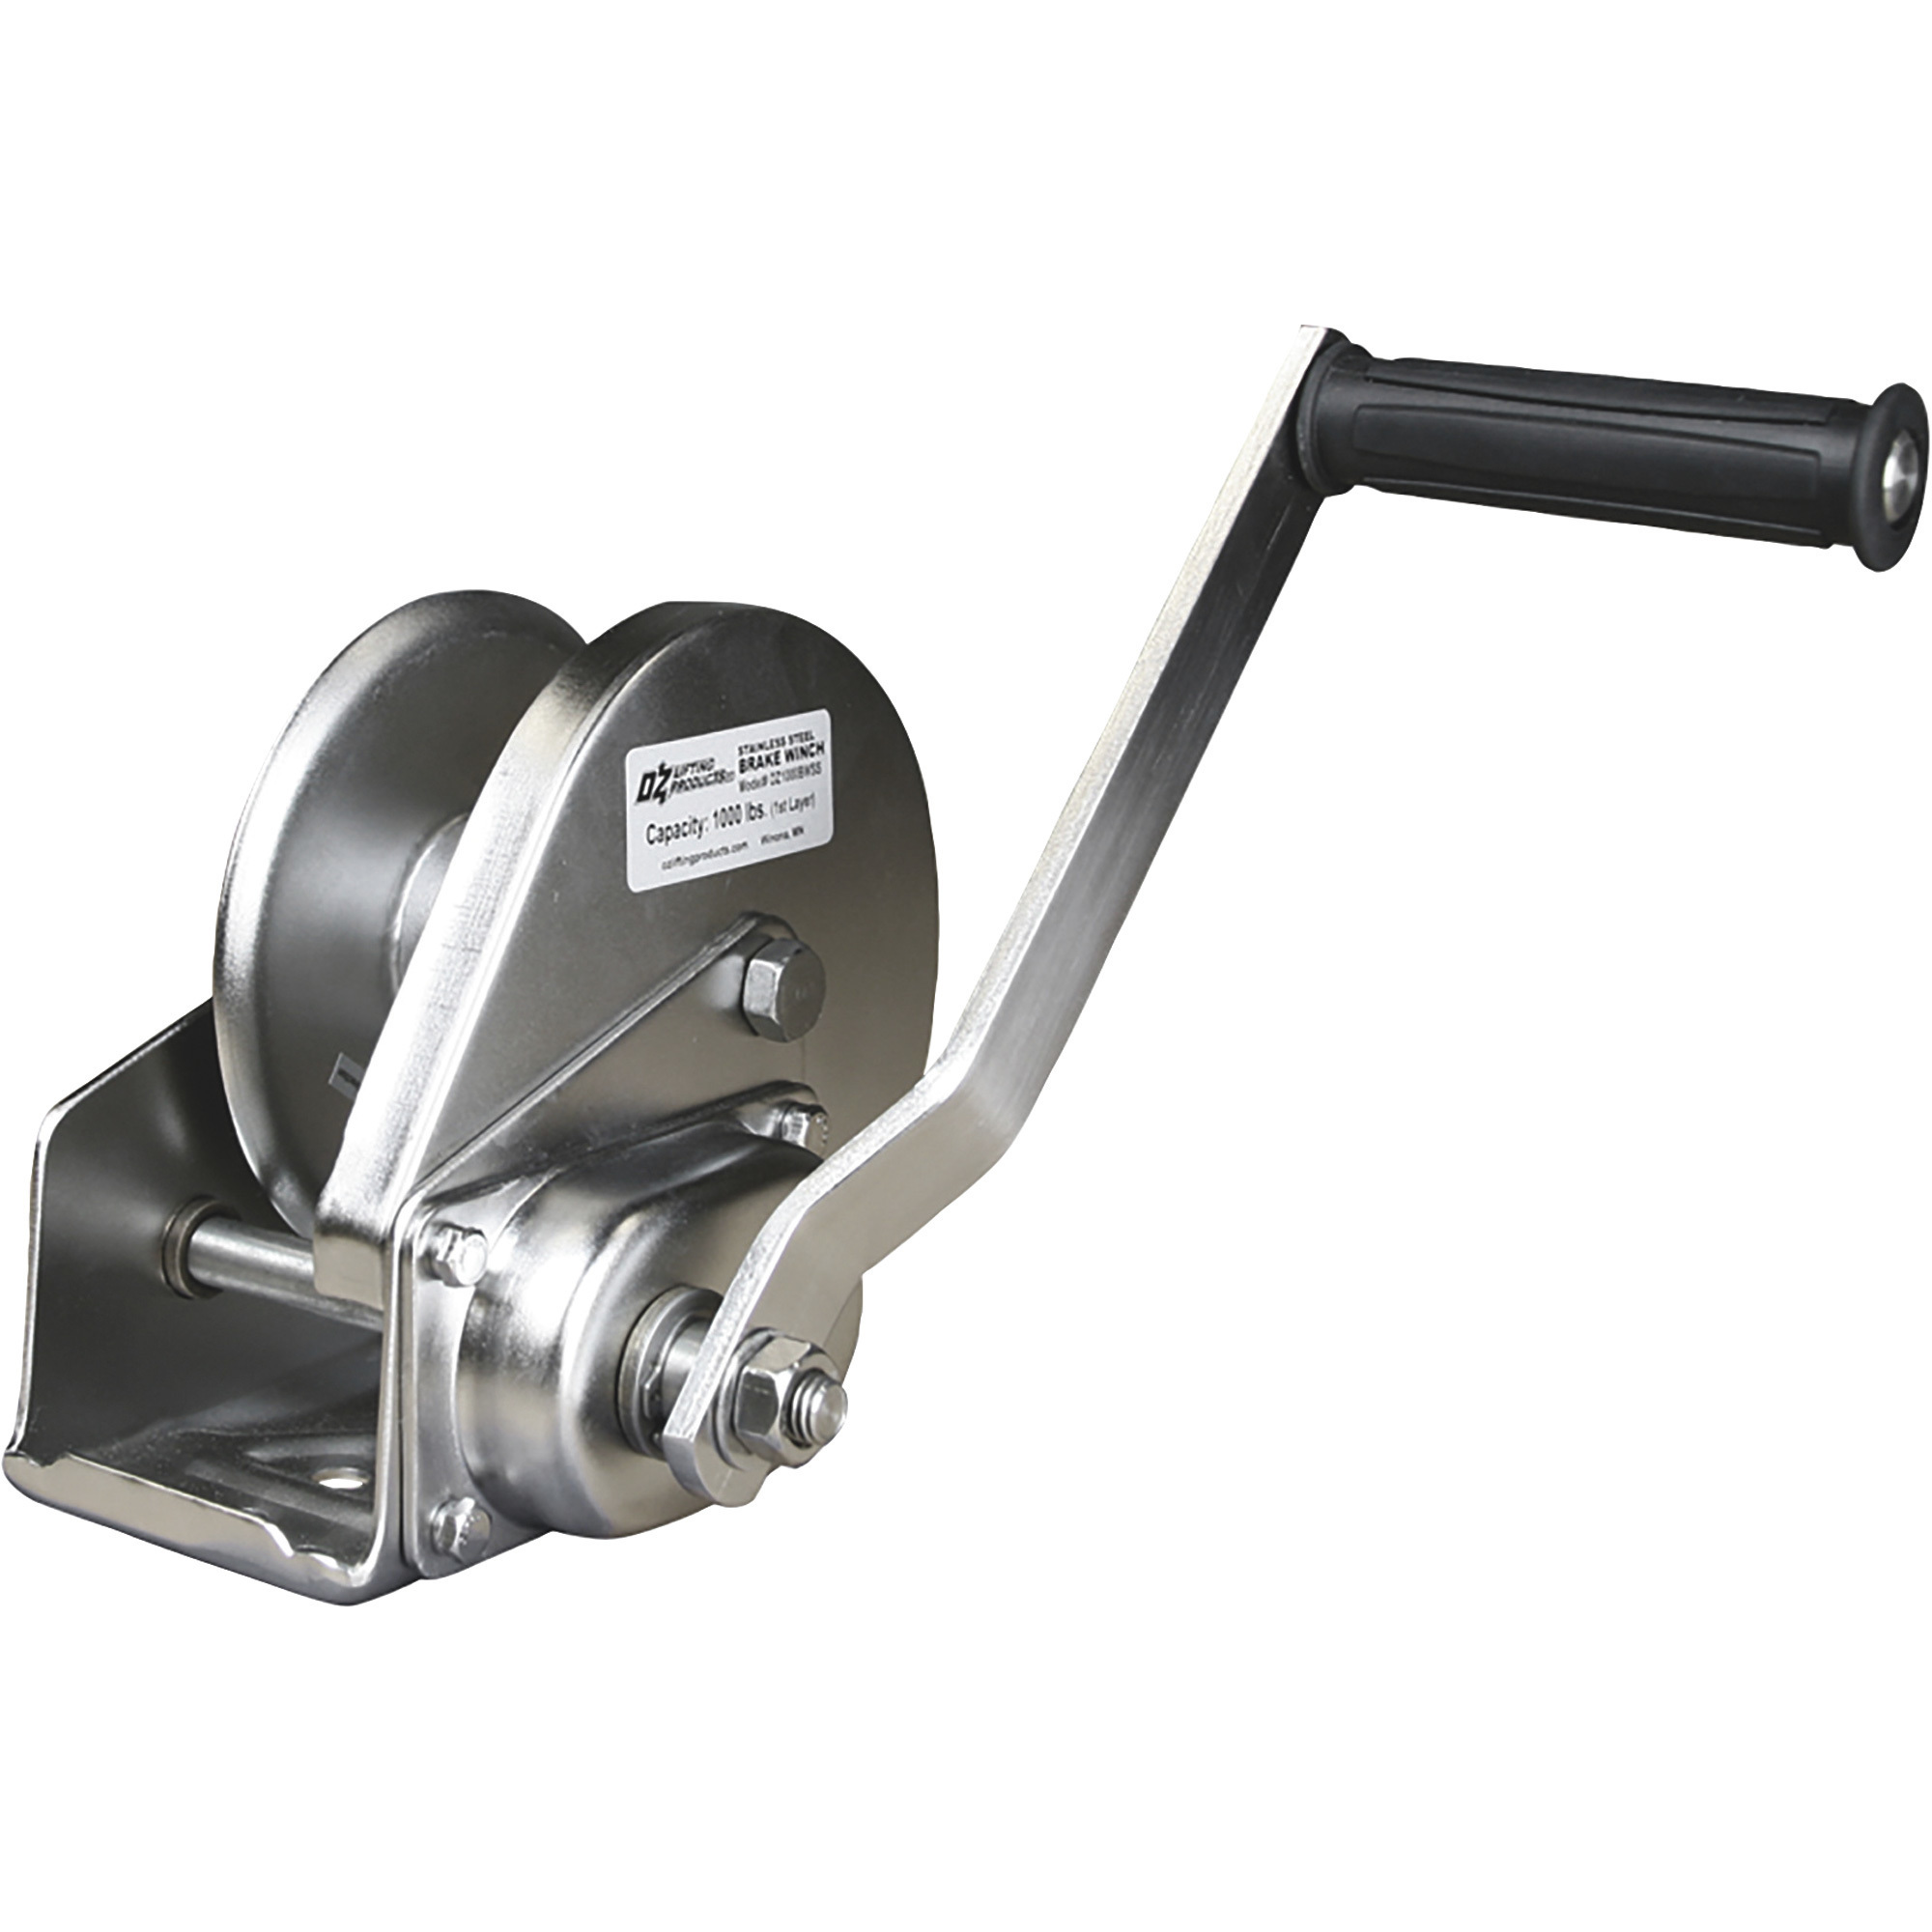 OZ Lifting Products Stainless Steel Manual Hand Winch â 1/2-Ton Capacity, Model OZ1000BWSS